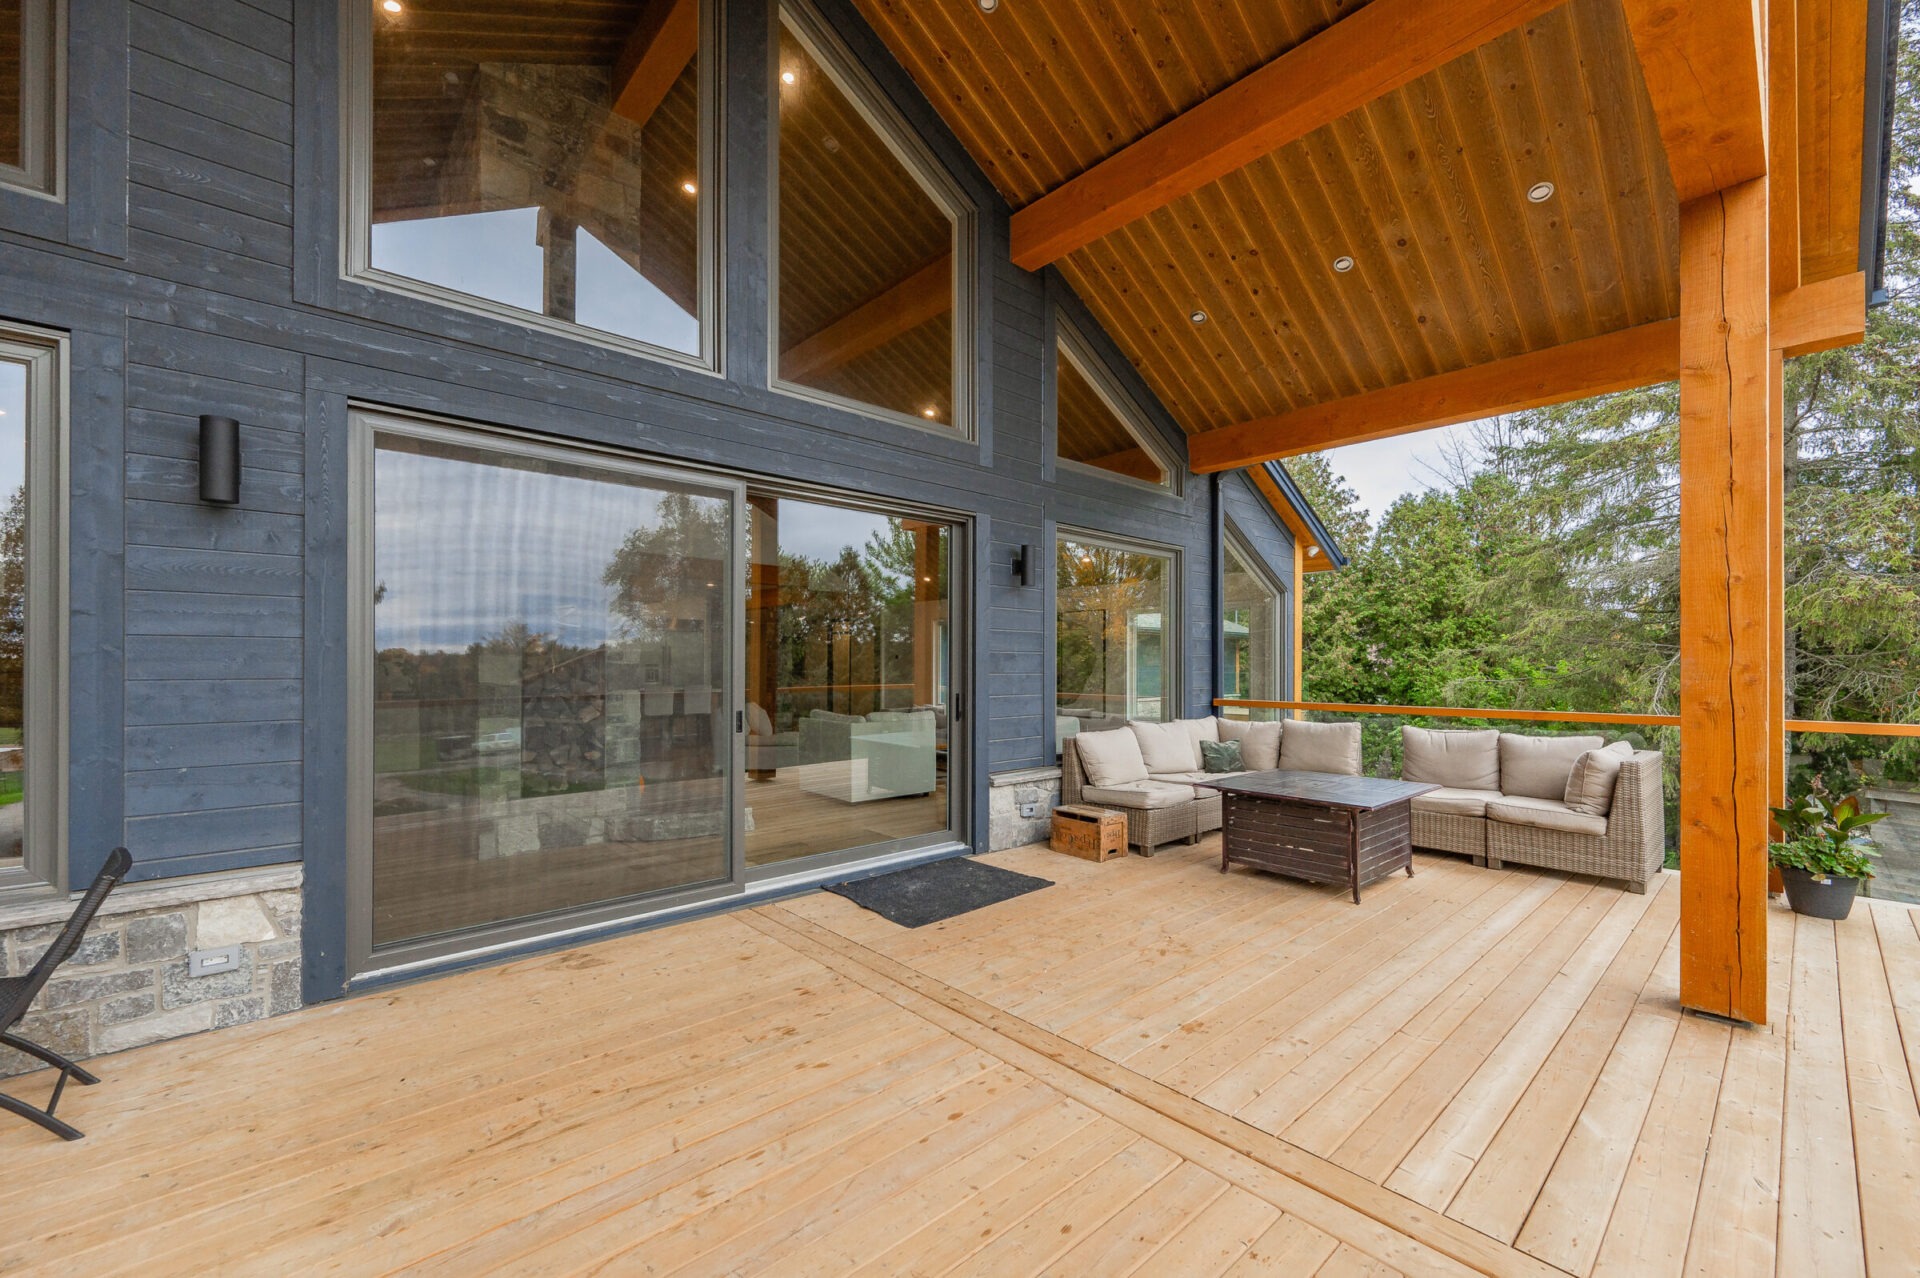 This is a spacious wooden deck of a modern house with large glass windows, comfortable outdoor furniture, and a view of greenery outside.